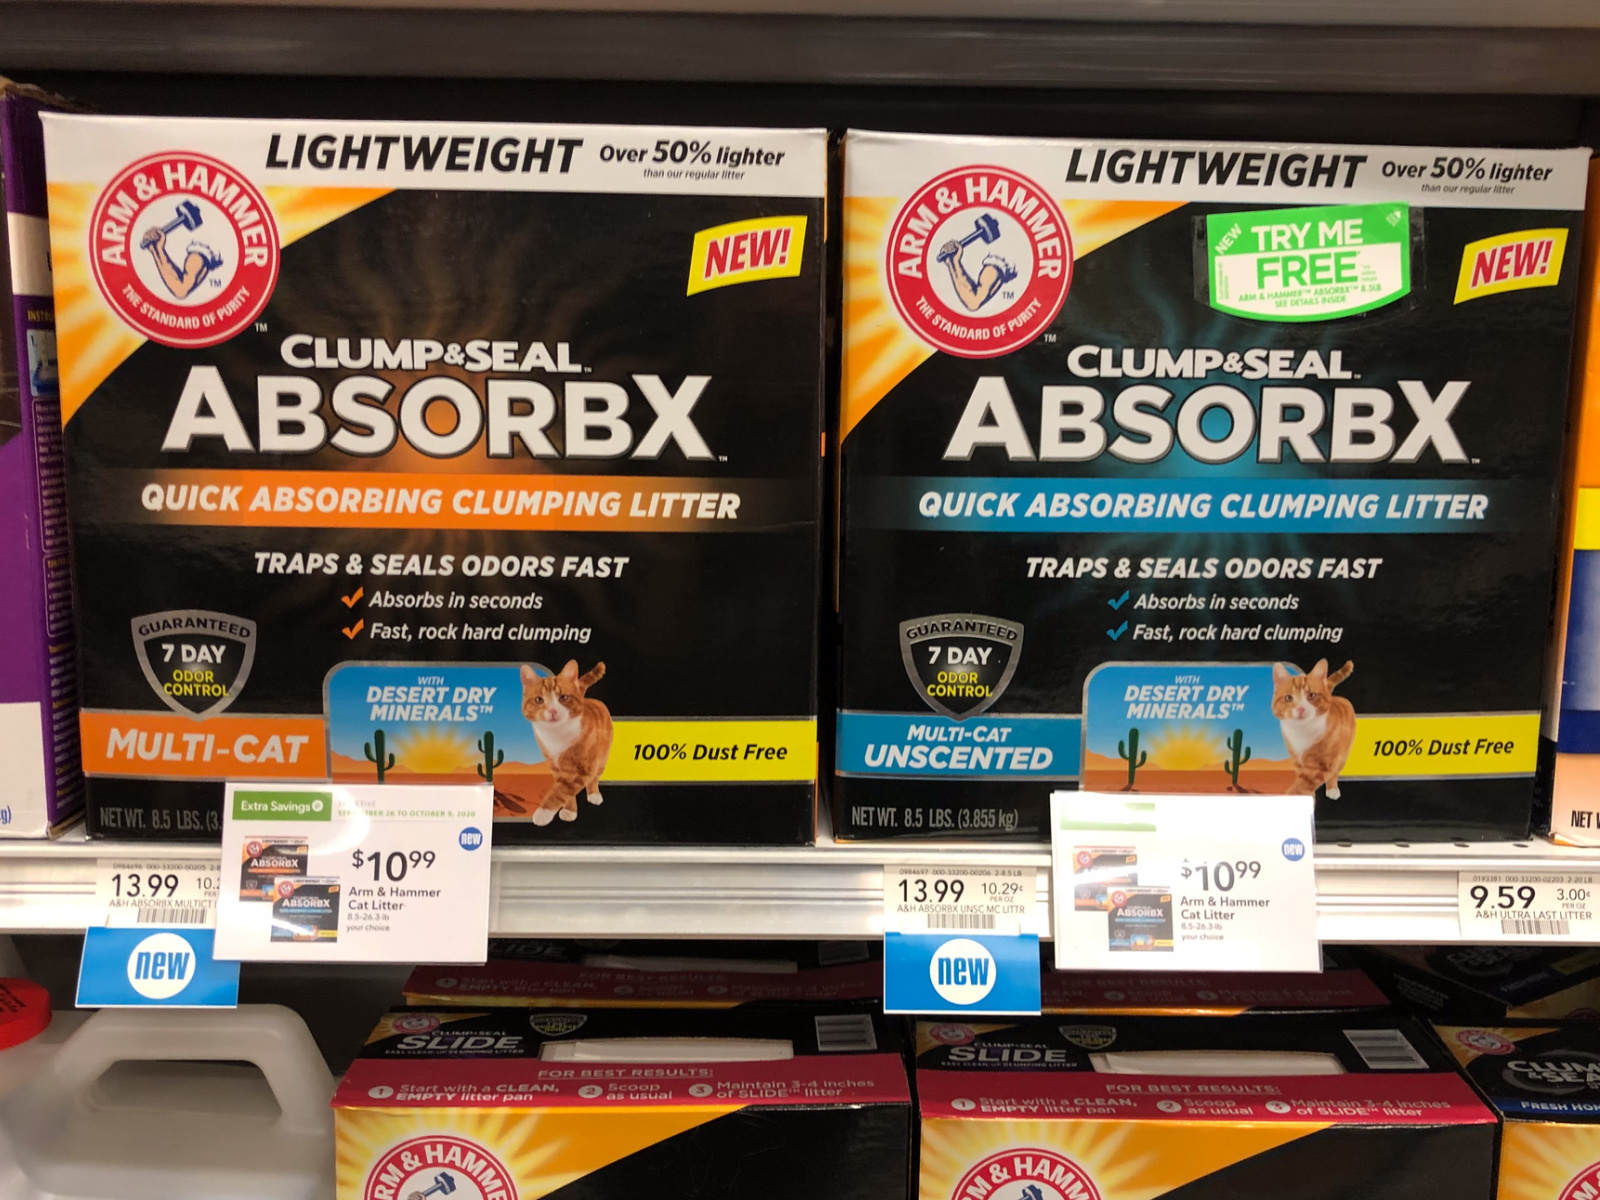 Get Big Savings On ARM & HAMMER™ AbsorbX Clumping Litter At Your Local Publix on I Heart Publix